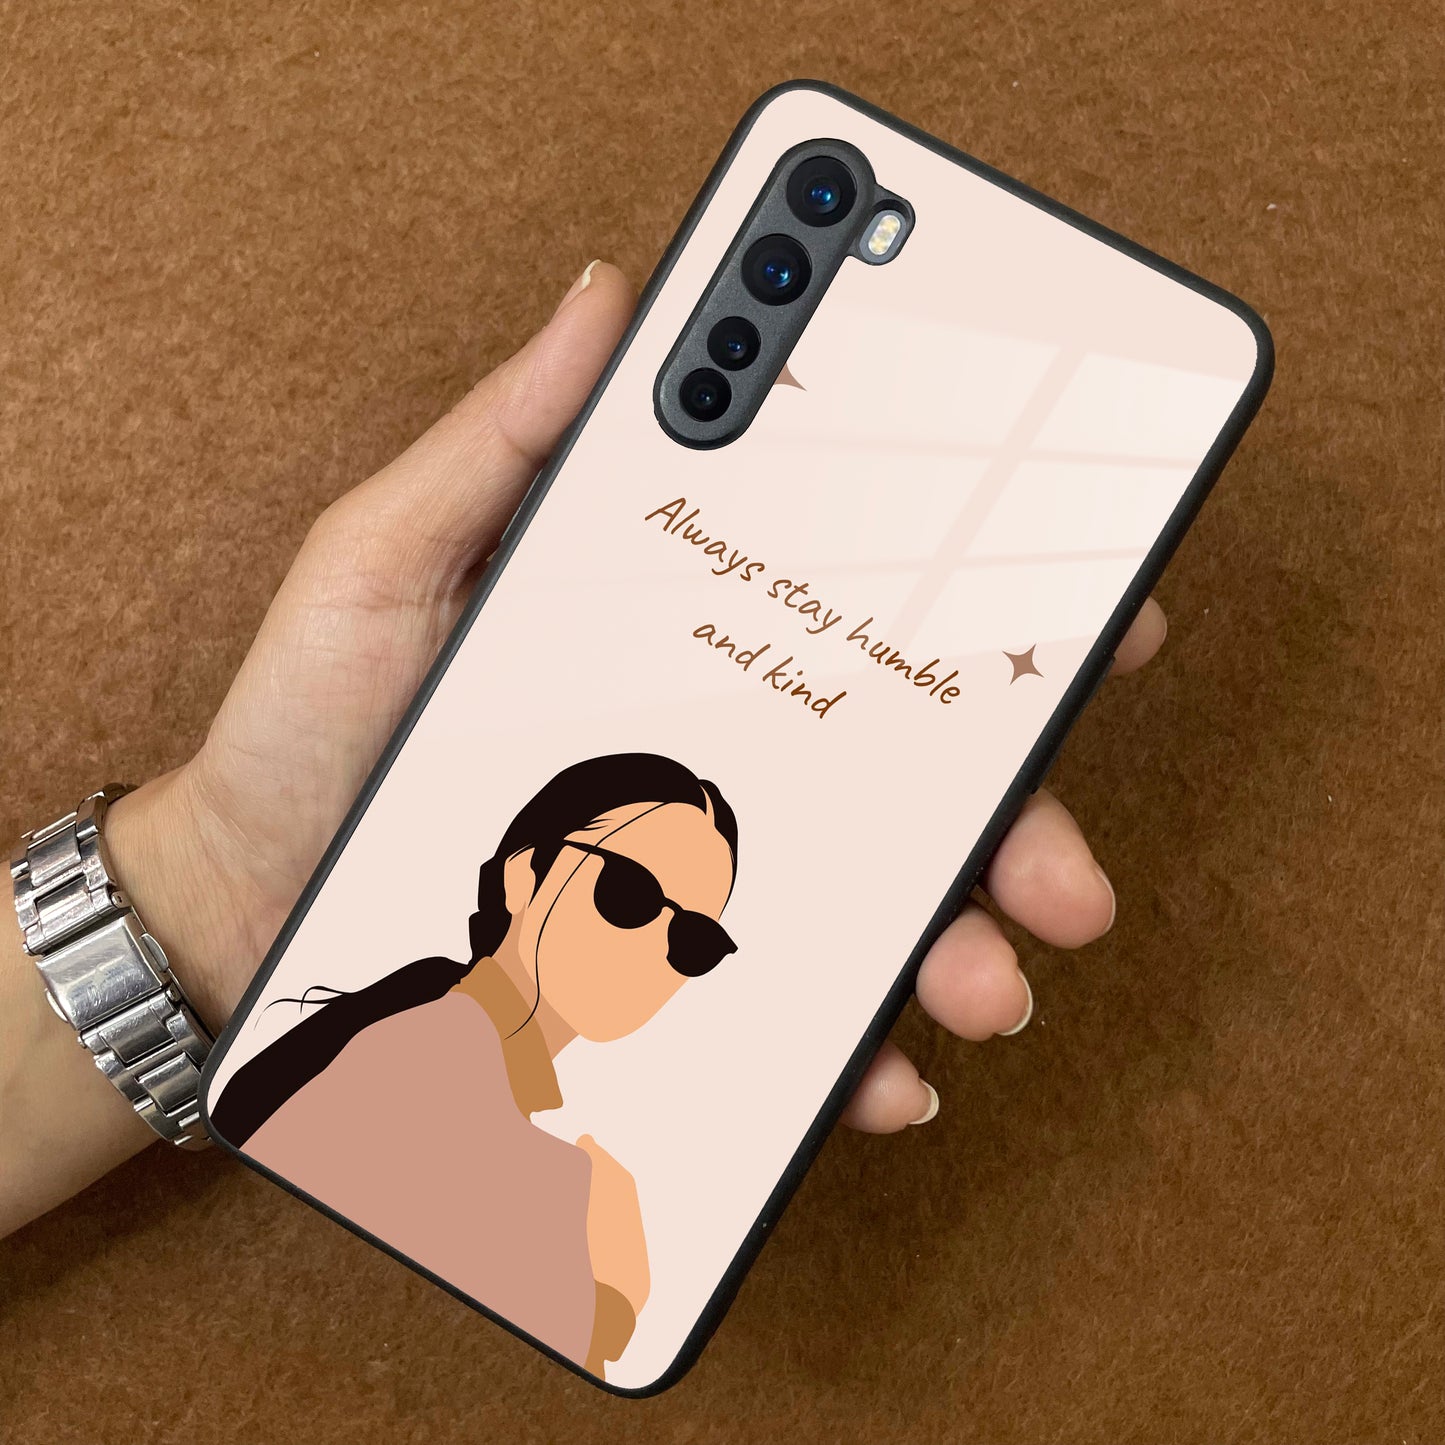 Always Stay Humble And Kind Glass Phone Cover for OnePlus